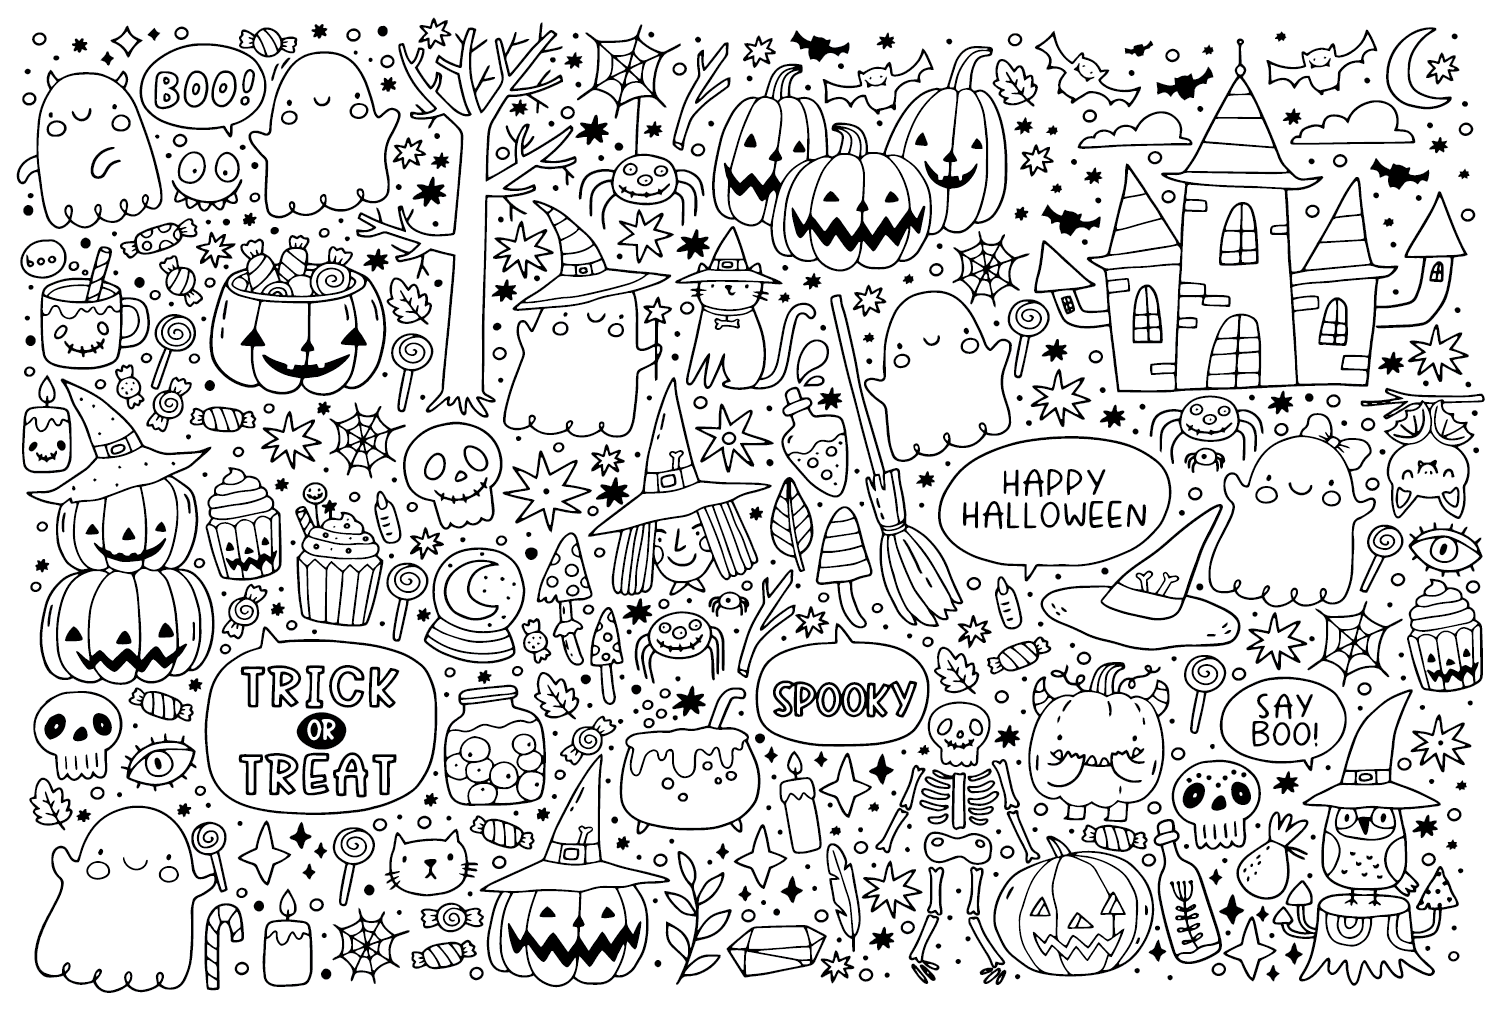 Trick or Treat Coloring Sheet